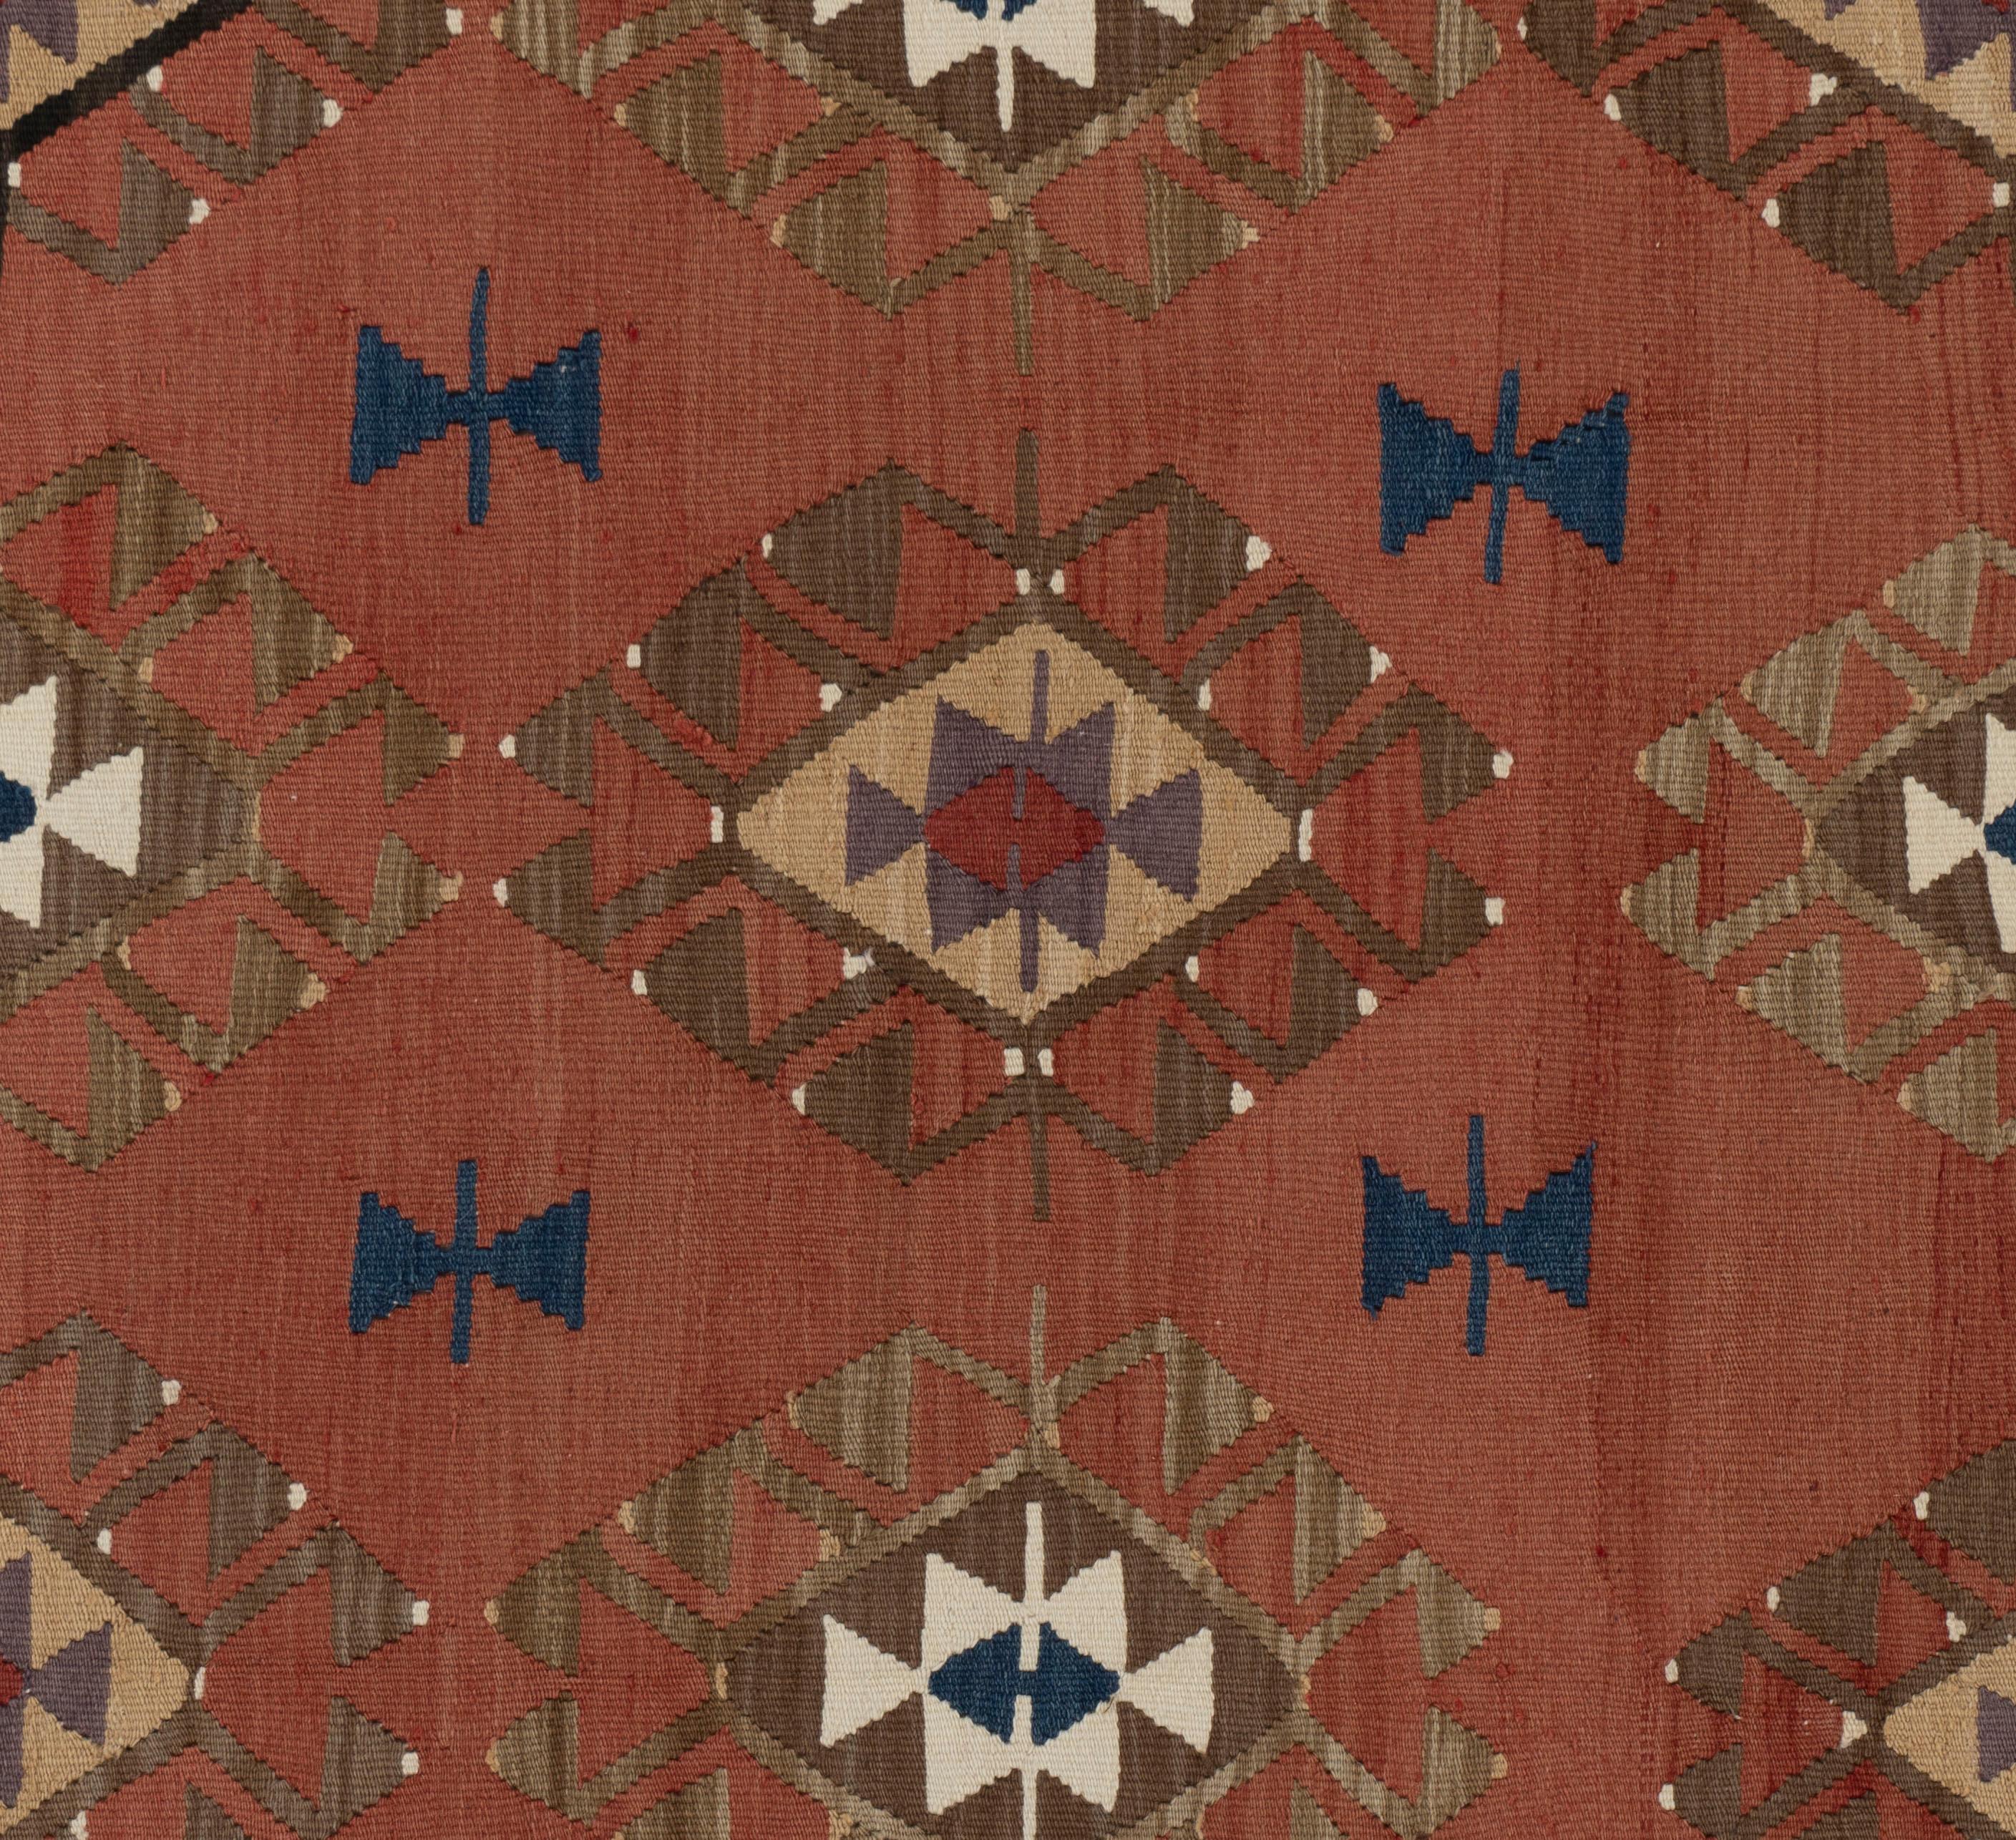 Vintage Turkish Kilim 3'8 X 5'7. This vintage Turkish flat weave Kilim is hand-woven. The simplicity and boldness of this piece can also give a contemporary feel and is able to look at home in both a modern and traditional setting. The geometric